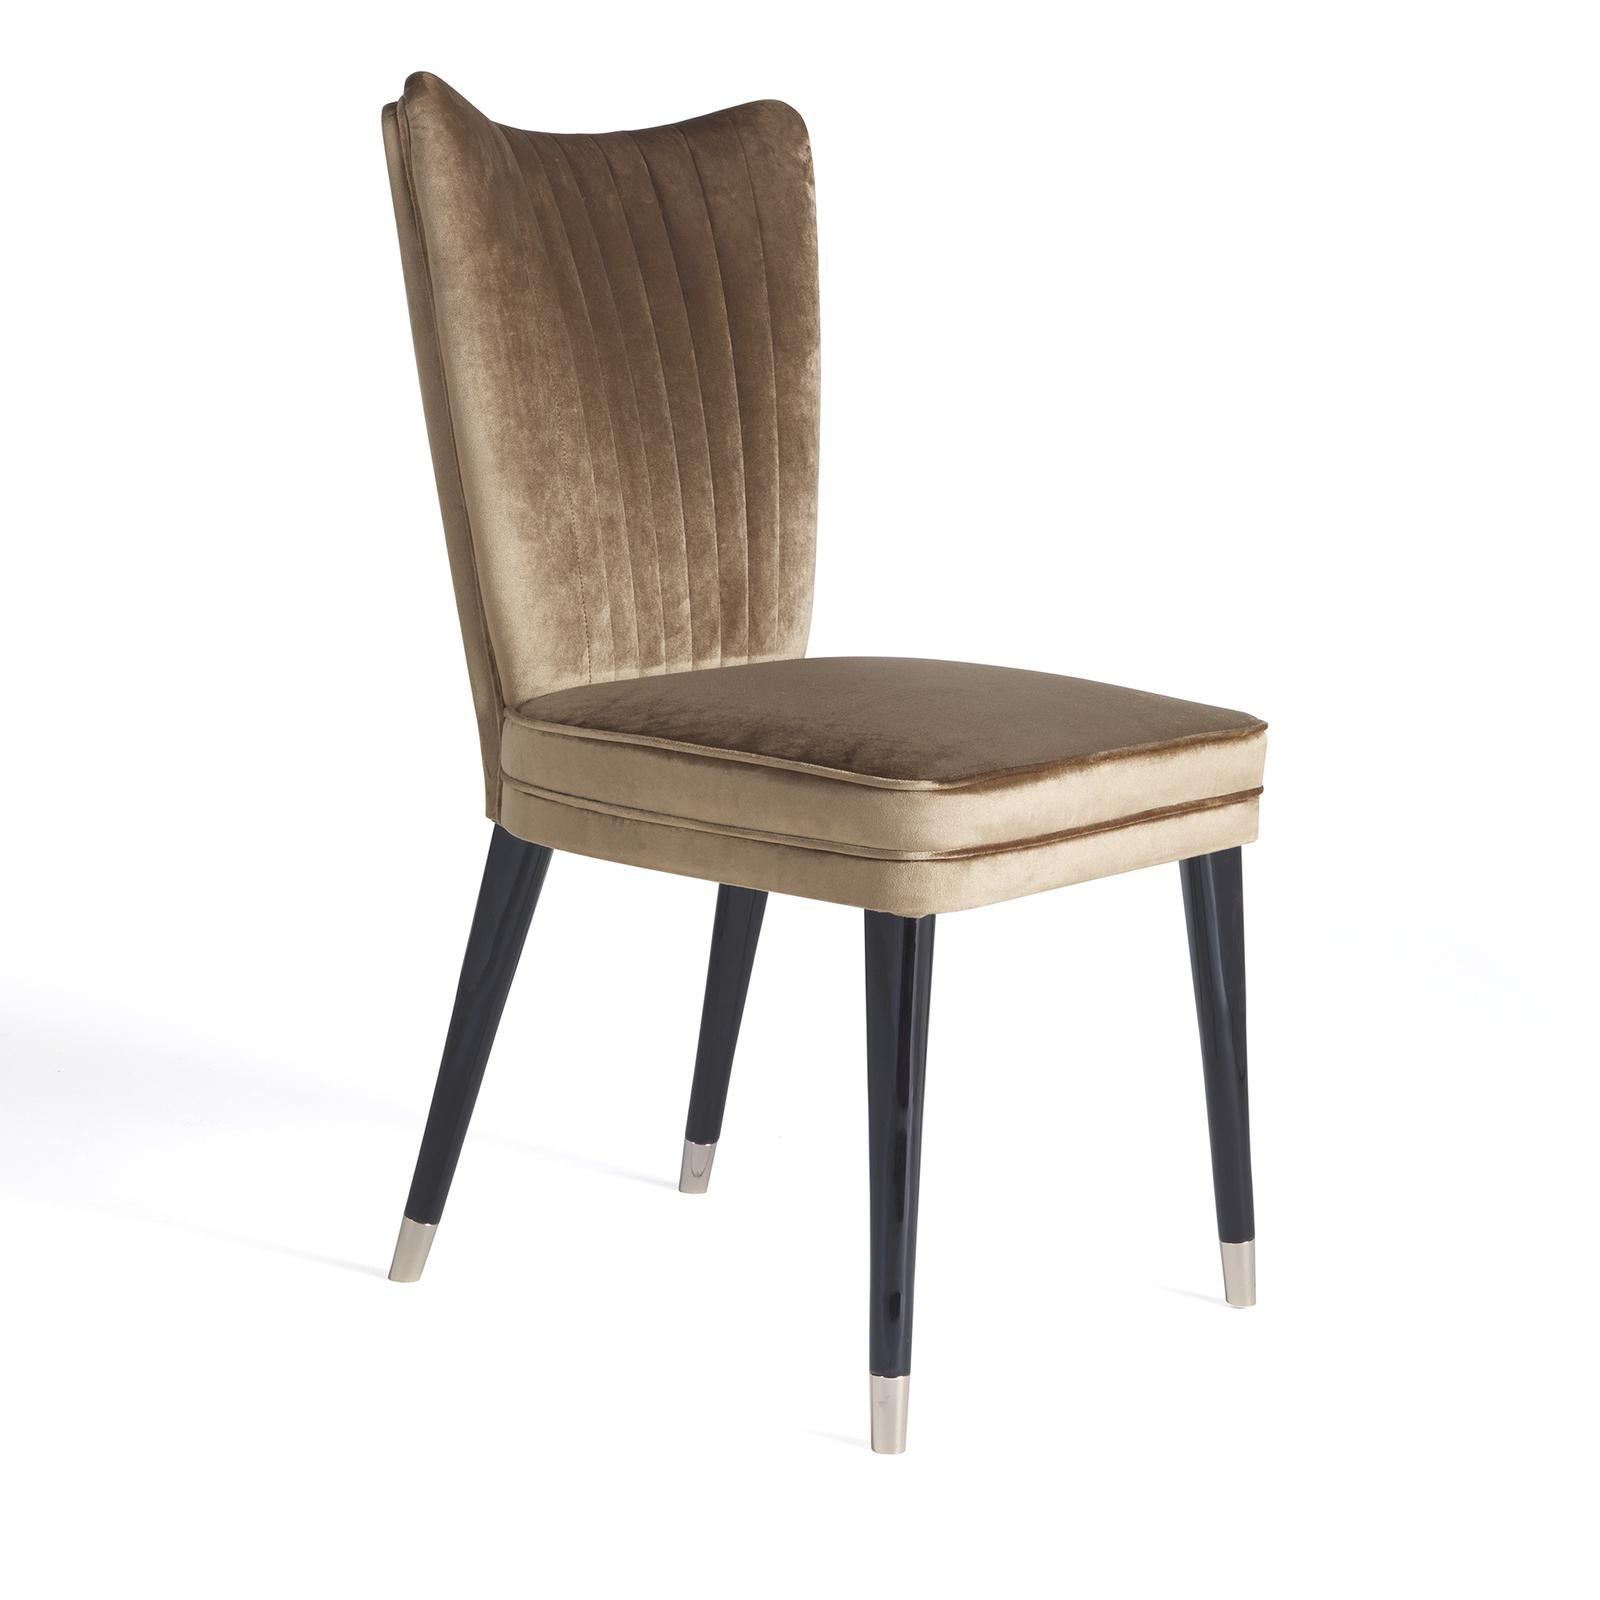 A classic piece that will enliven a sitting room, living room, or even the bedroom vanity, this refined chair will bring timeless, vintage style to any room. Crafted of wood, the streamlined silhouette features a broad, subtly flared back with a